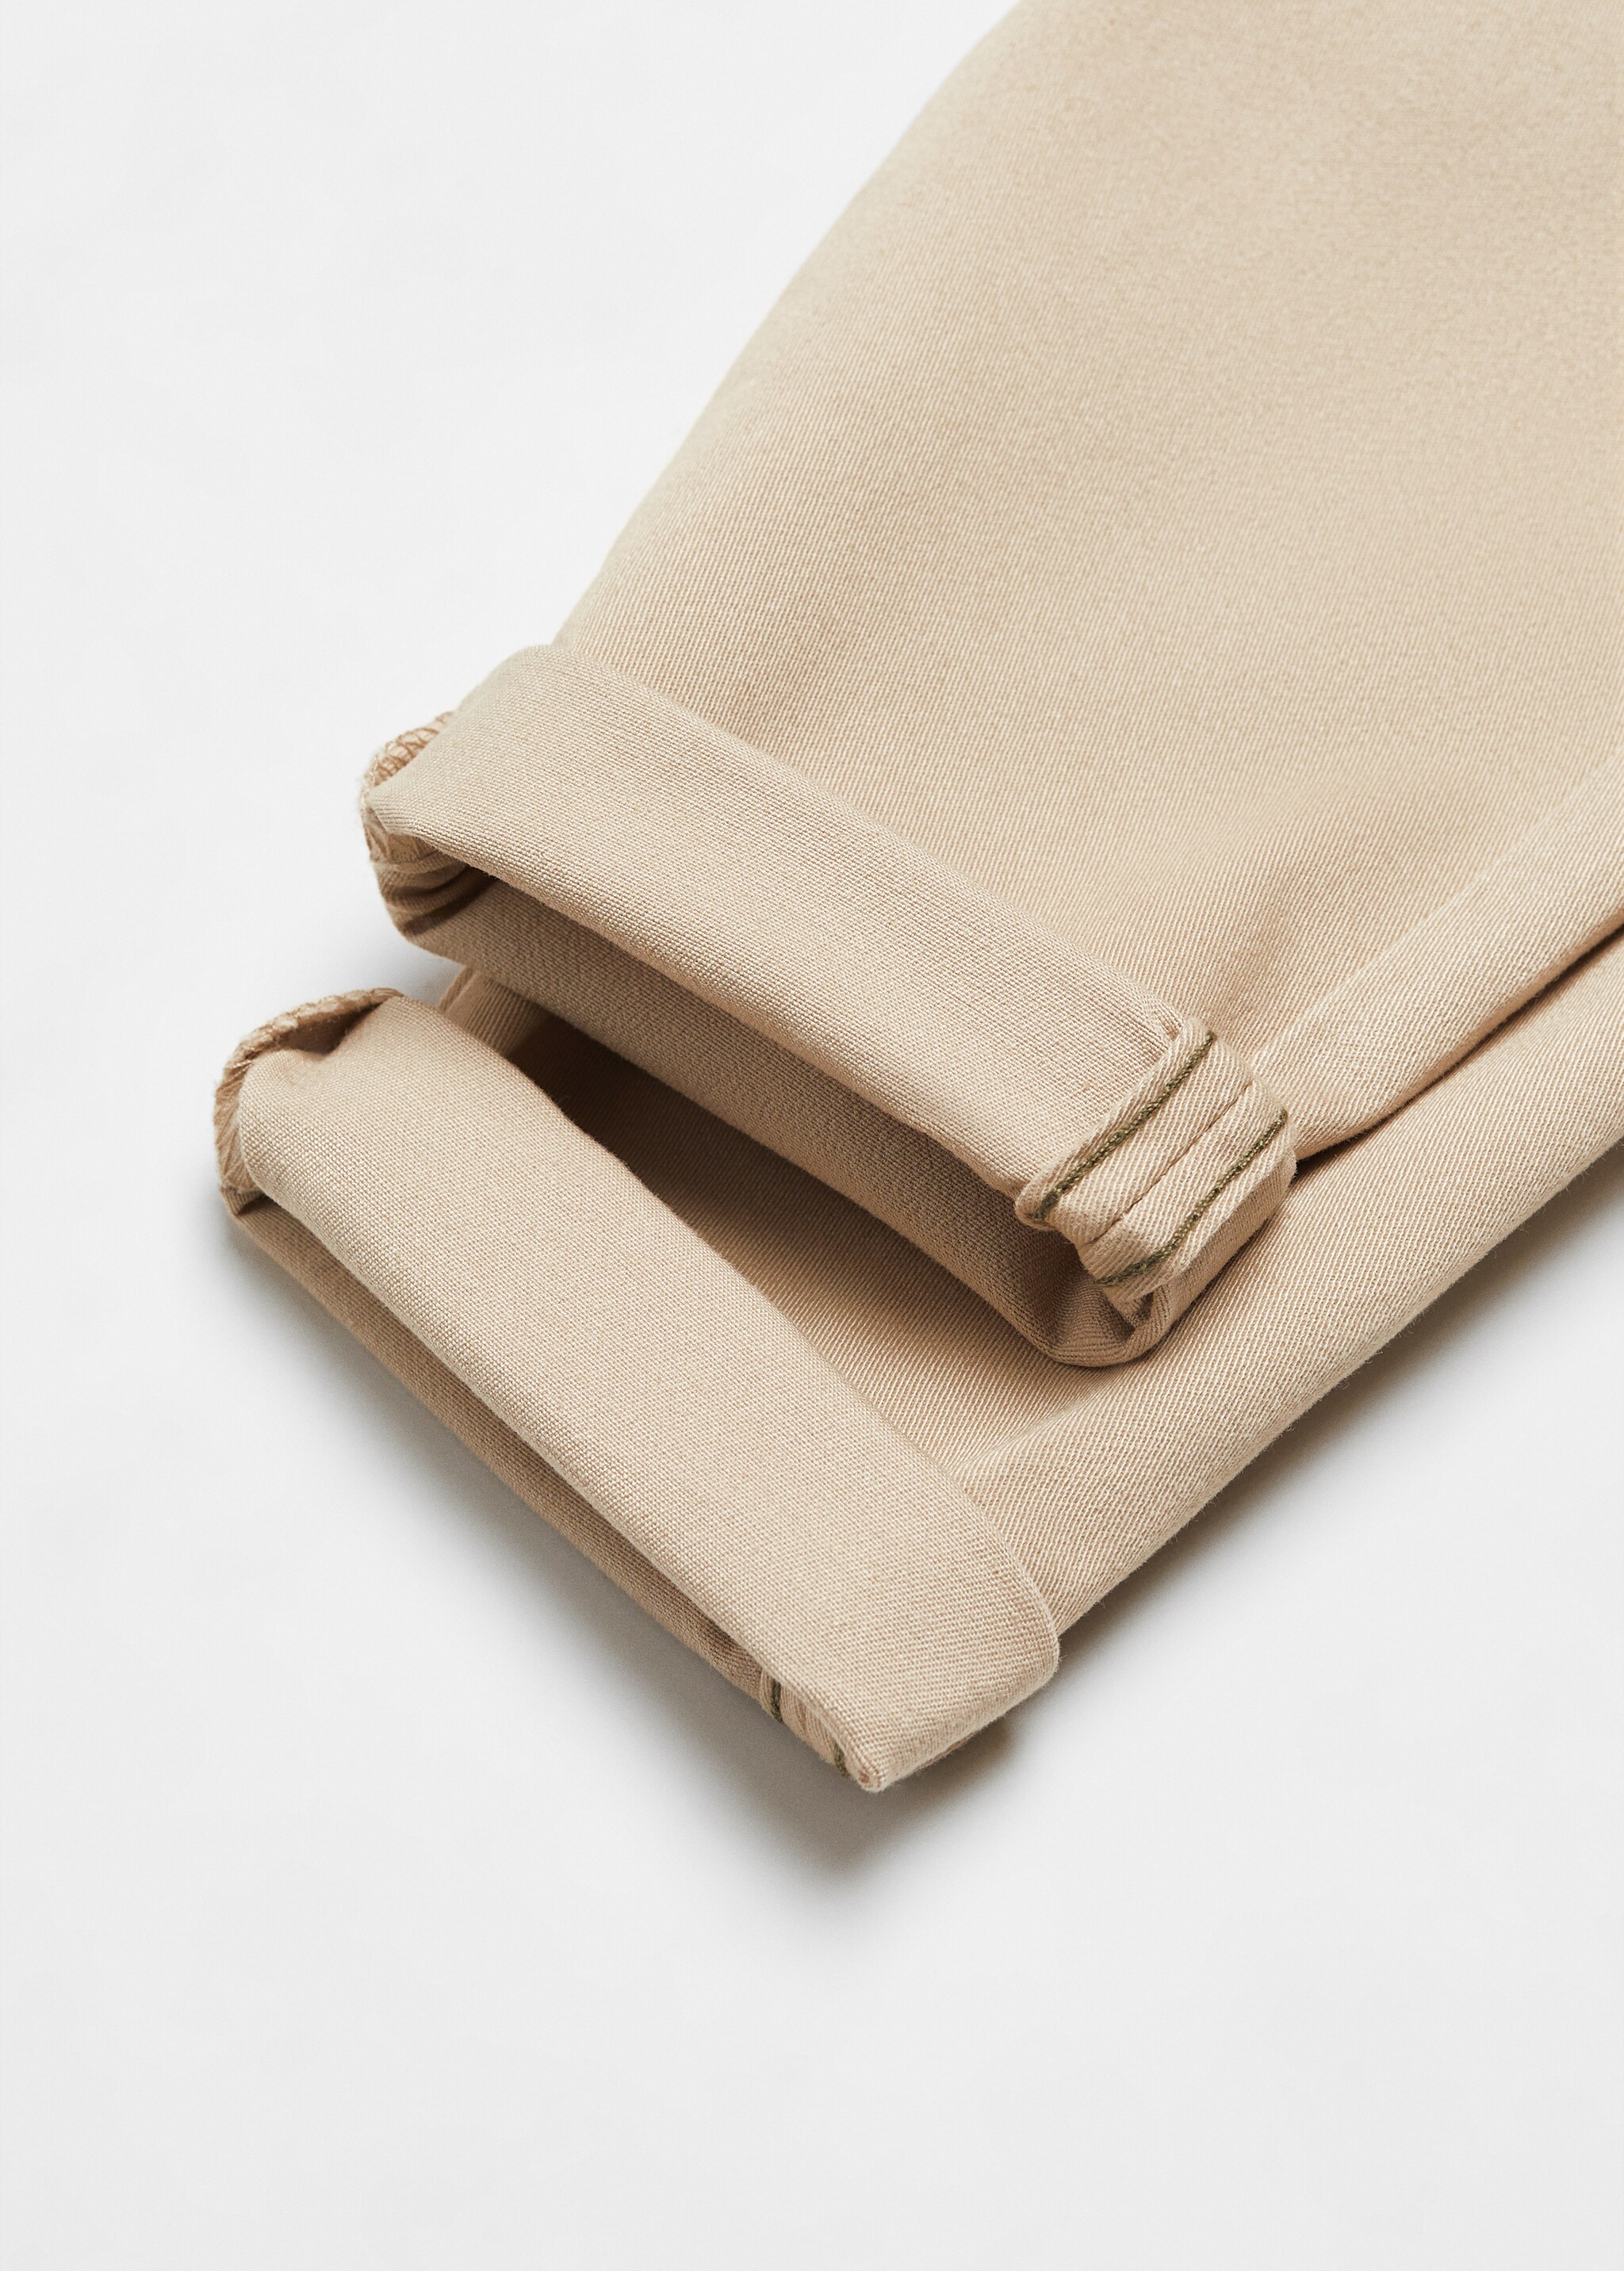 Cotton chinos - Details of the article 0